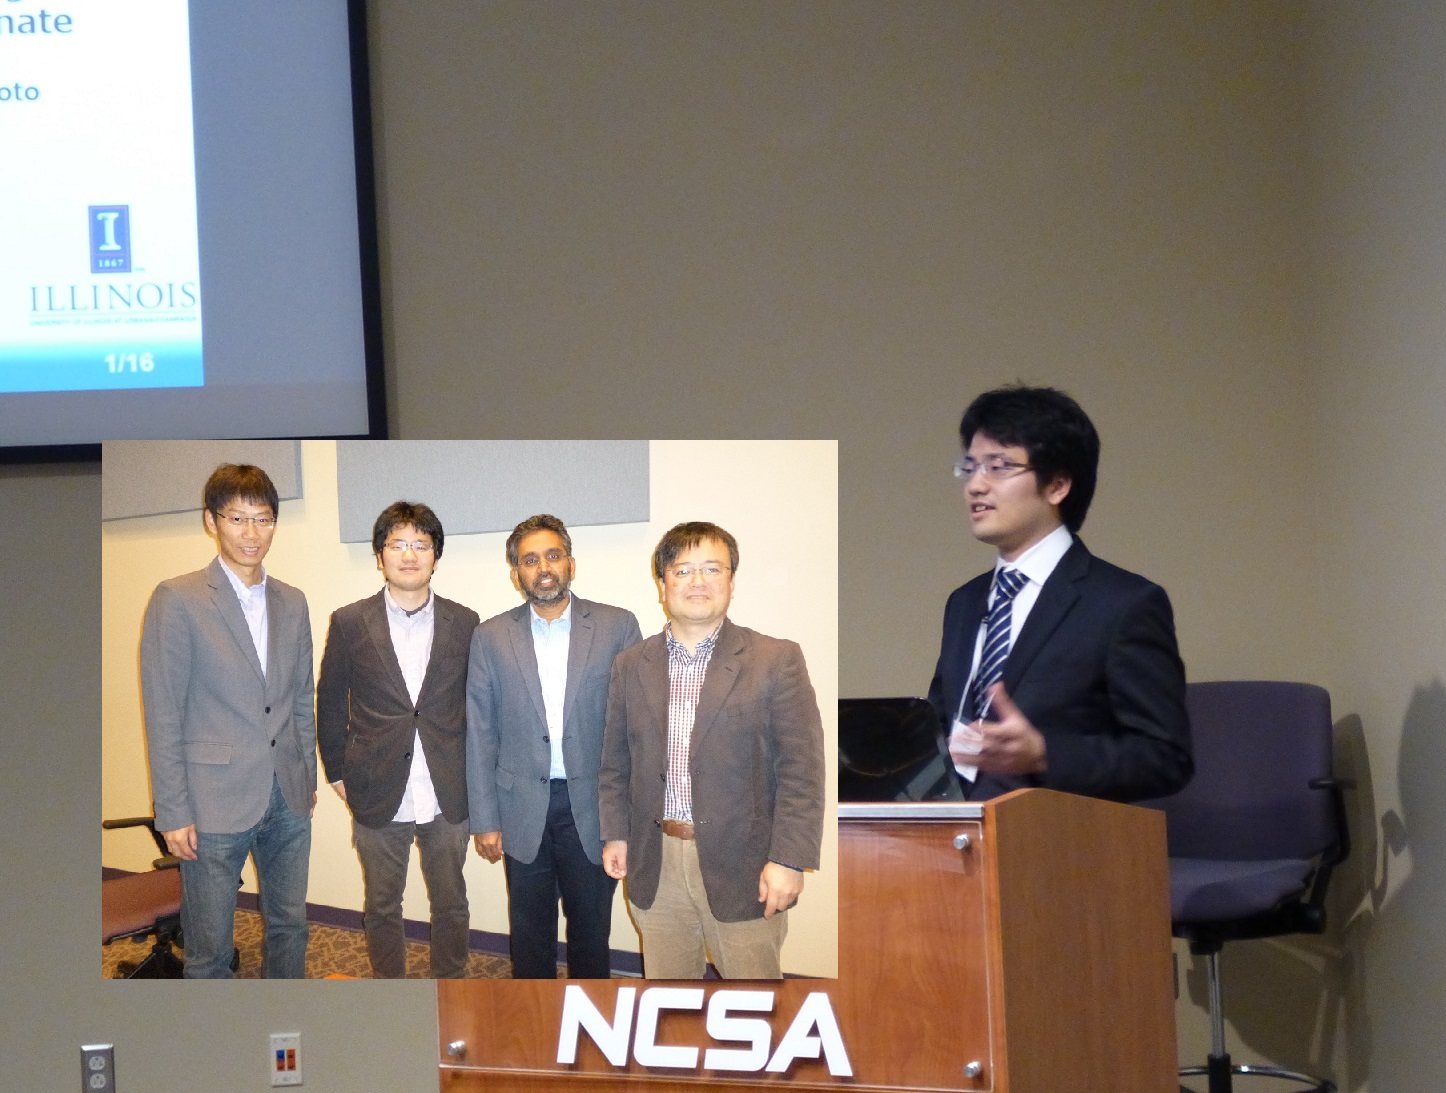 Fujisaki(D1) took part in the PIRE program between Kyushu University and University of Illinois as exchanging student.